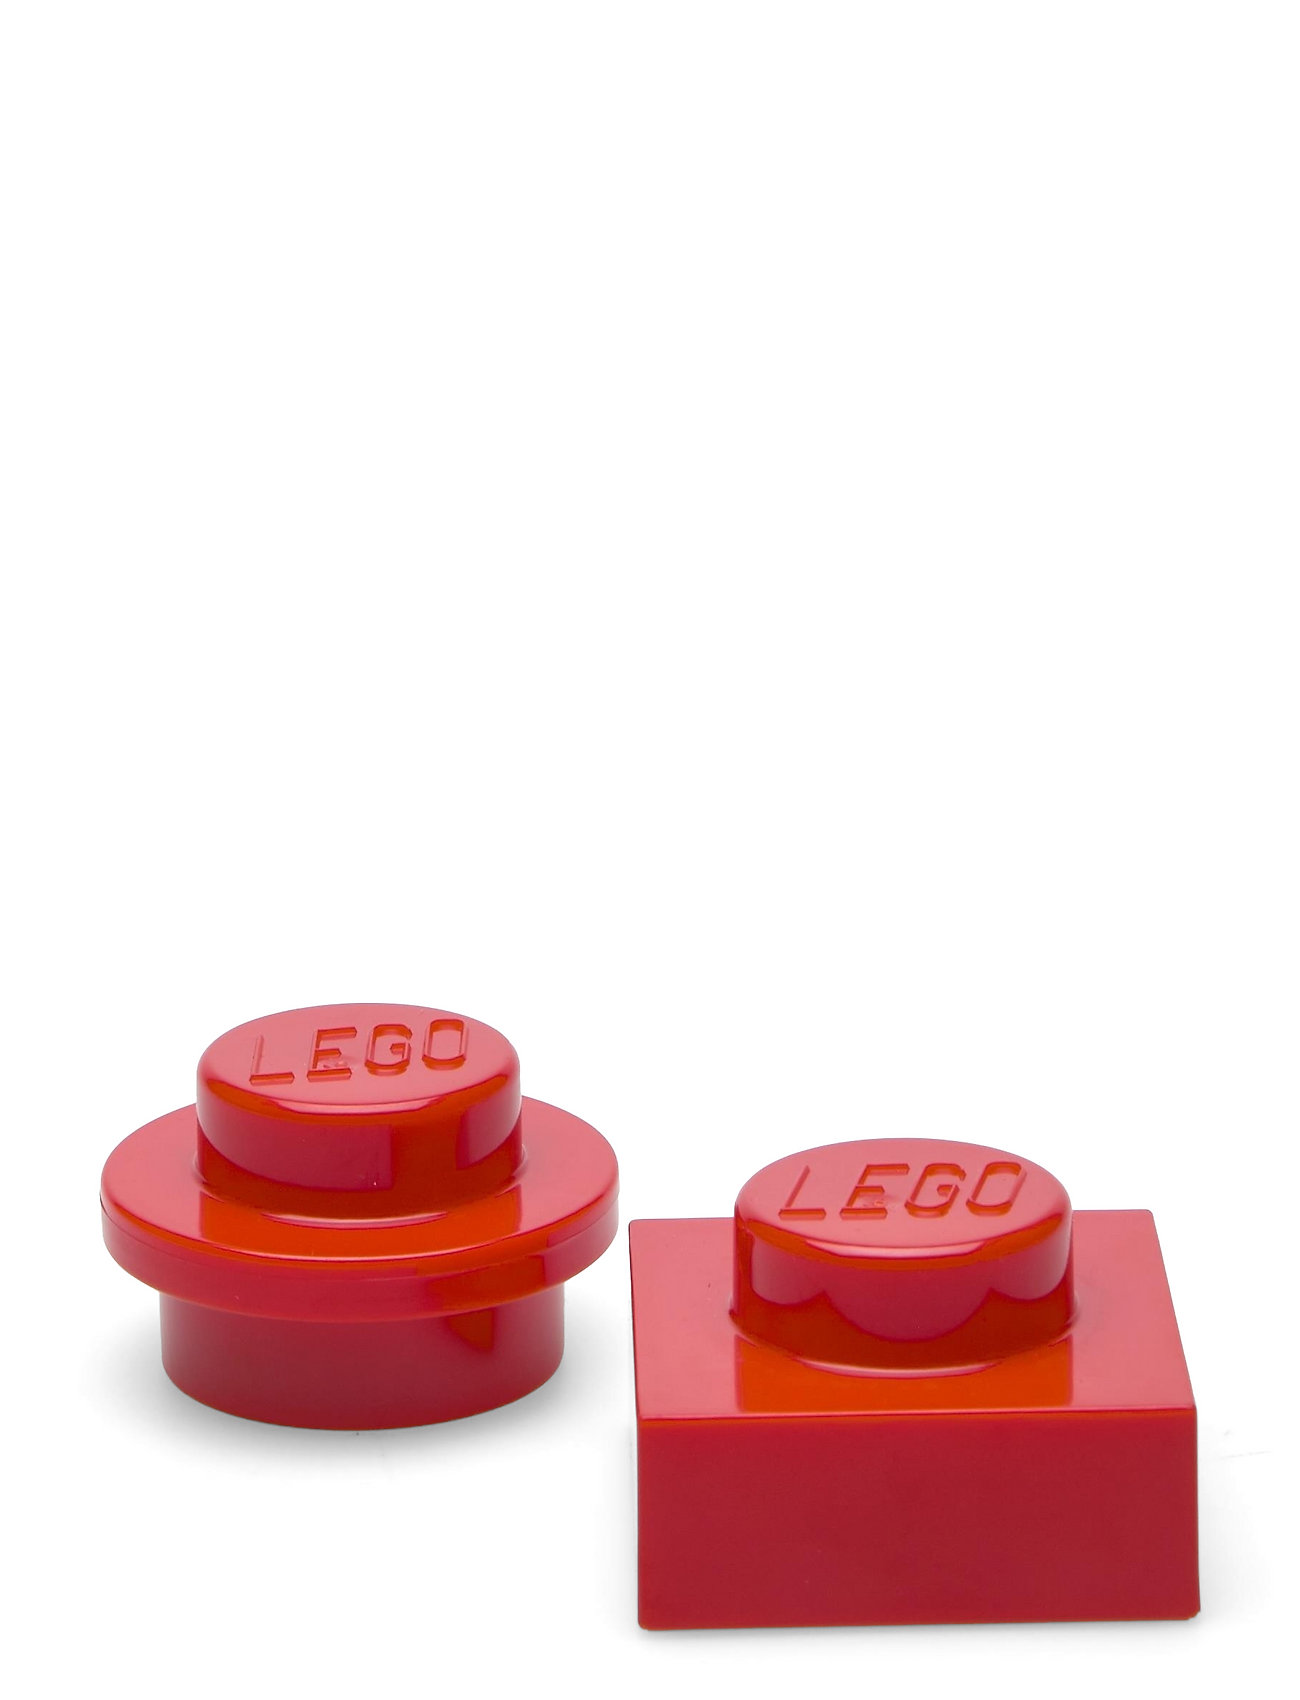 Lego Magnet Set Round And Square Home Kids Decor Decoration Accessories-details Red LEGO STORAGE